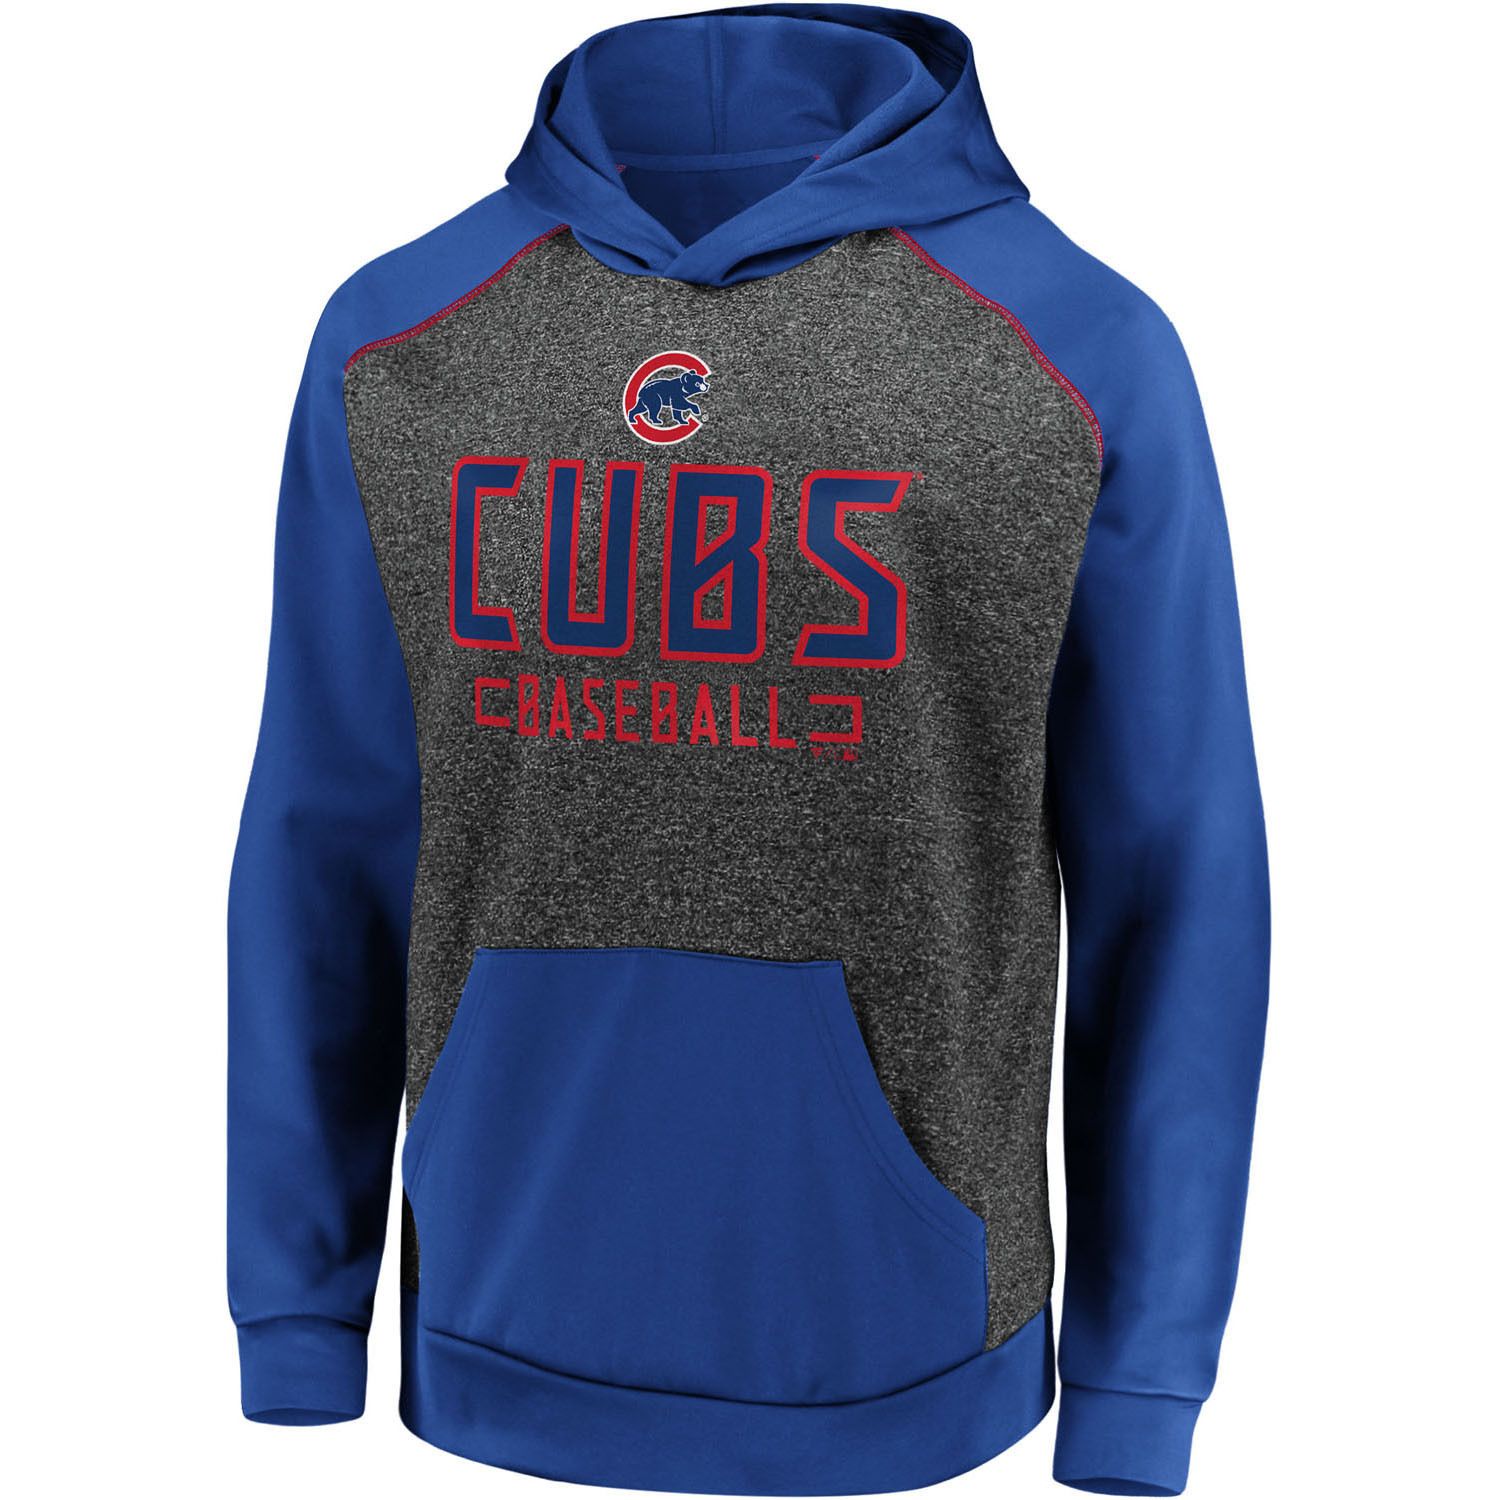 where to buy cubs shirts